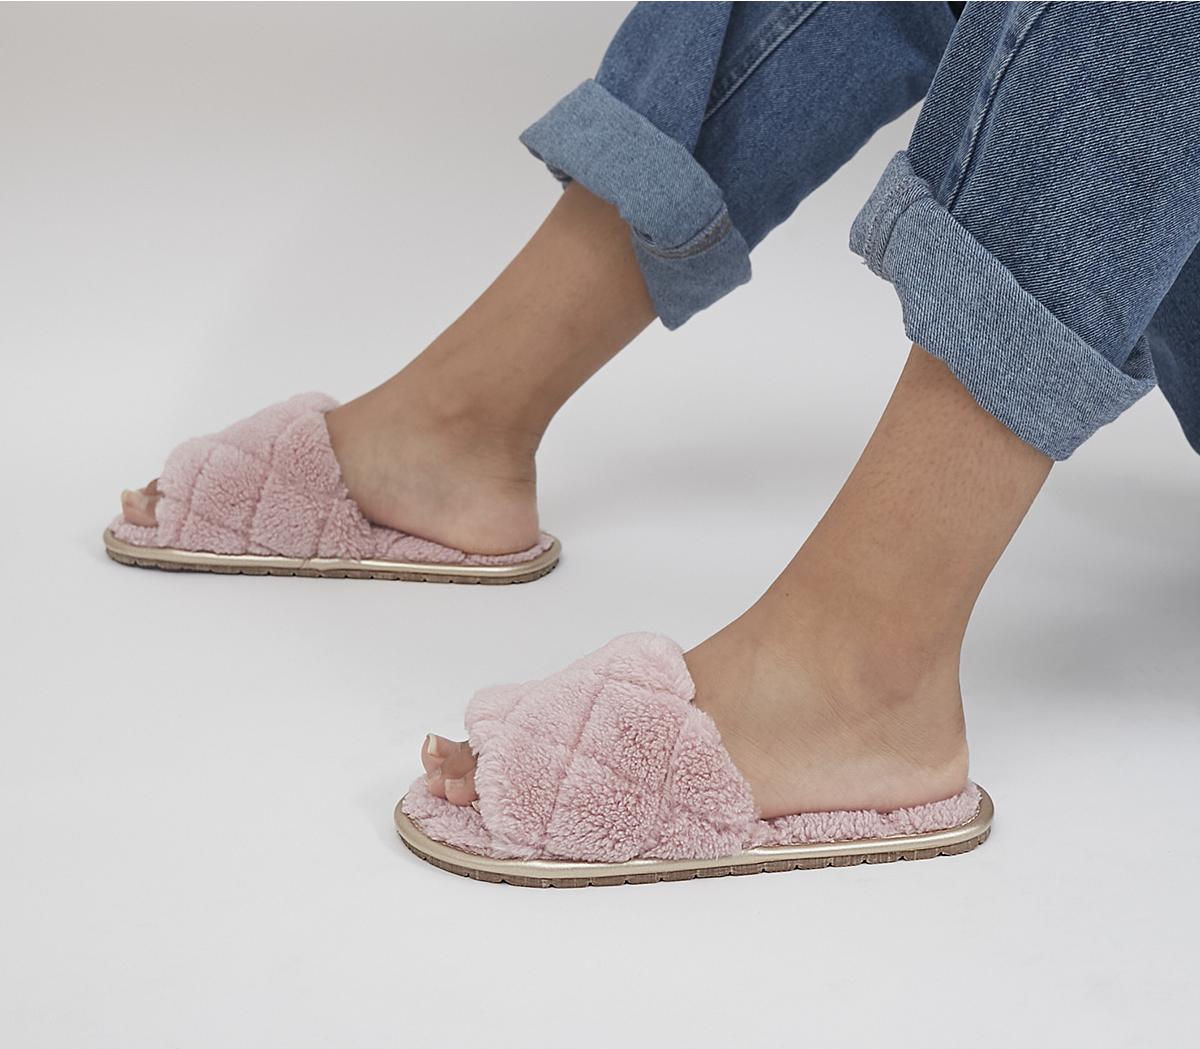 OfficeFlorida Open Toe SlippersPink Faux Fur With Rose Gold